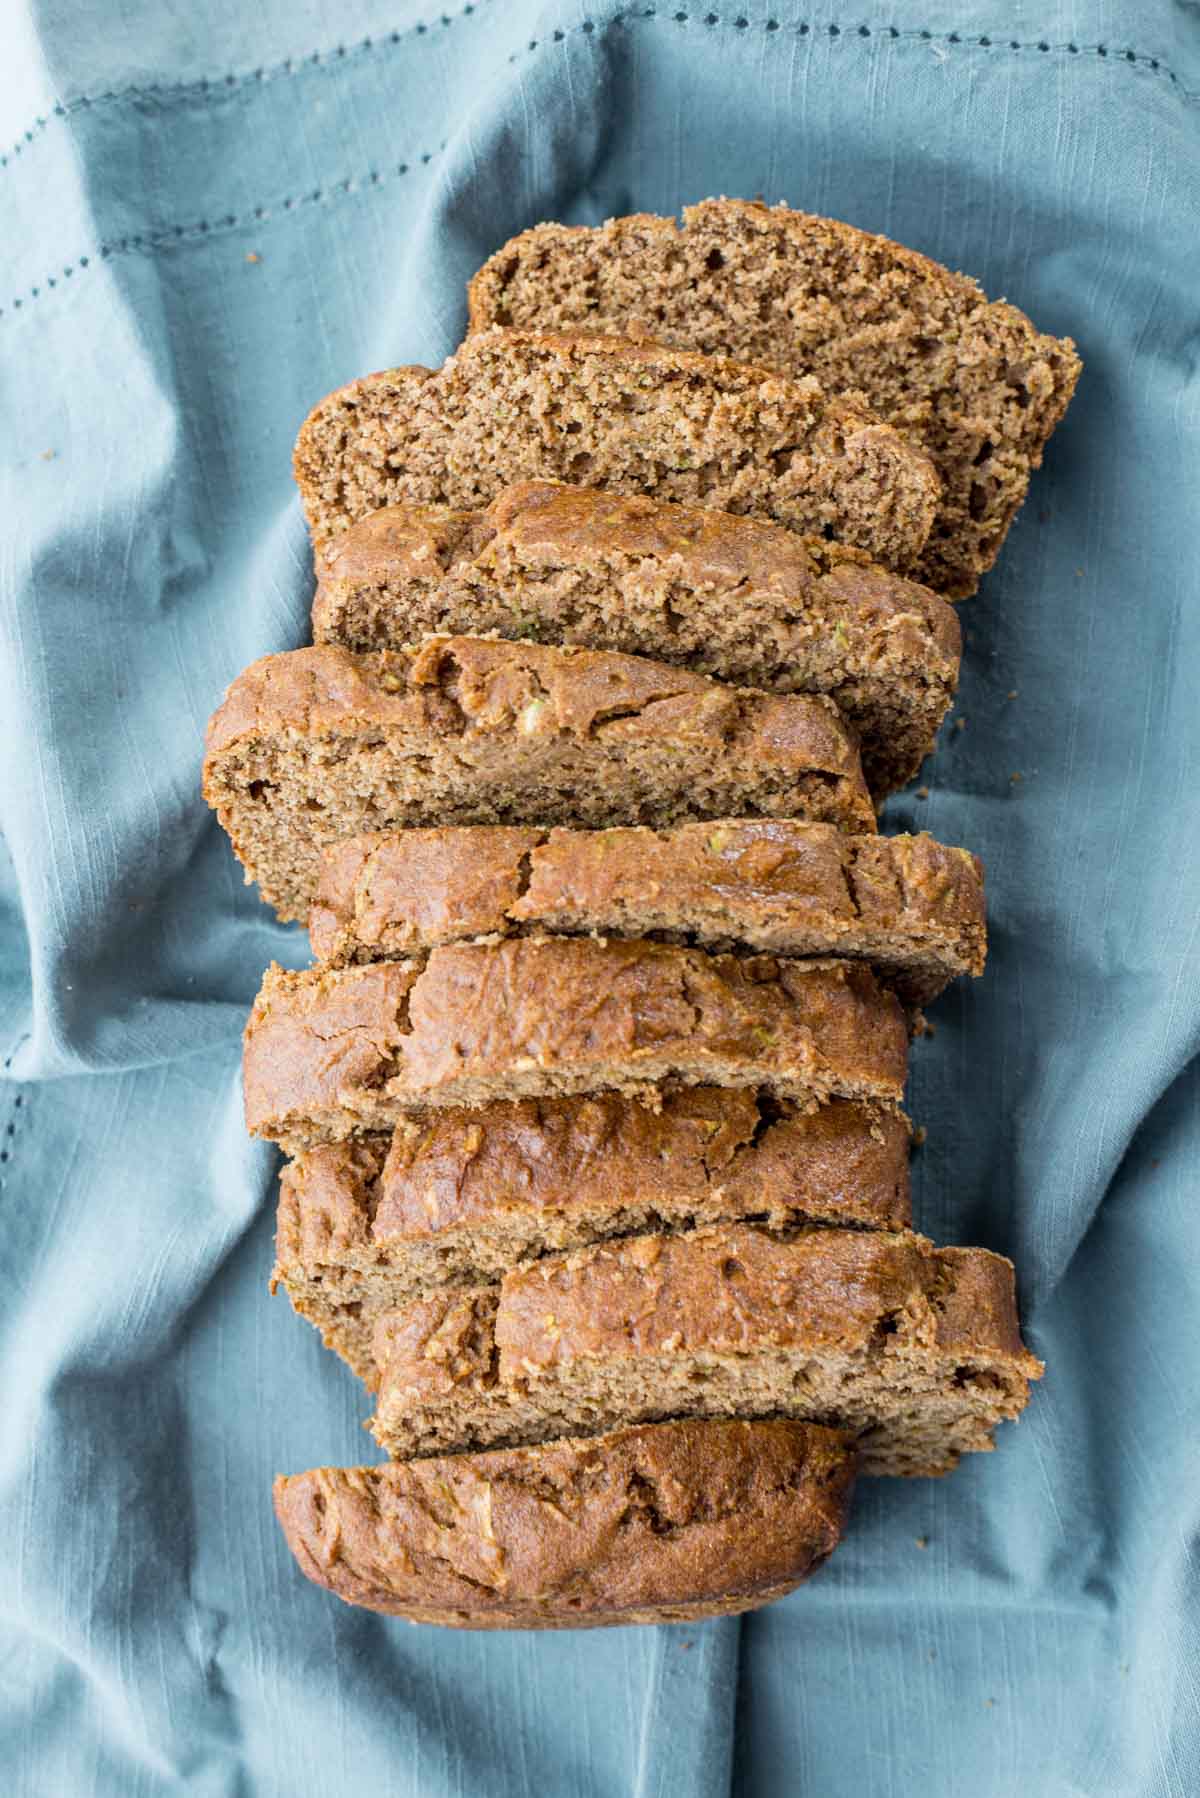 Try this high fiber, high protein spiced gluten-free zucchini bread with this easy recipe. 